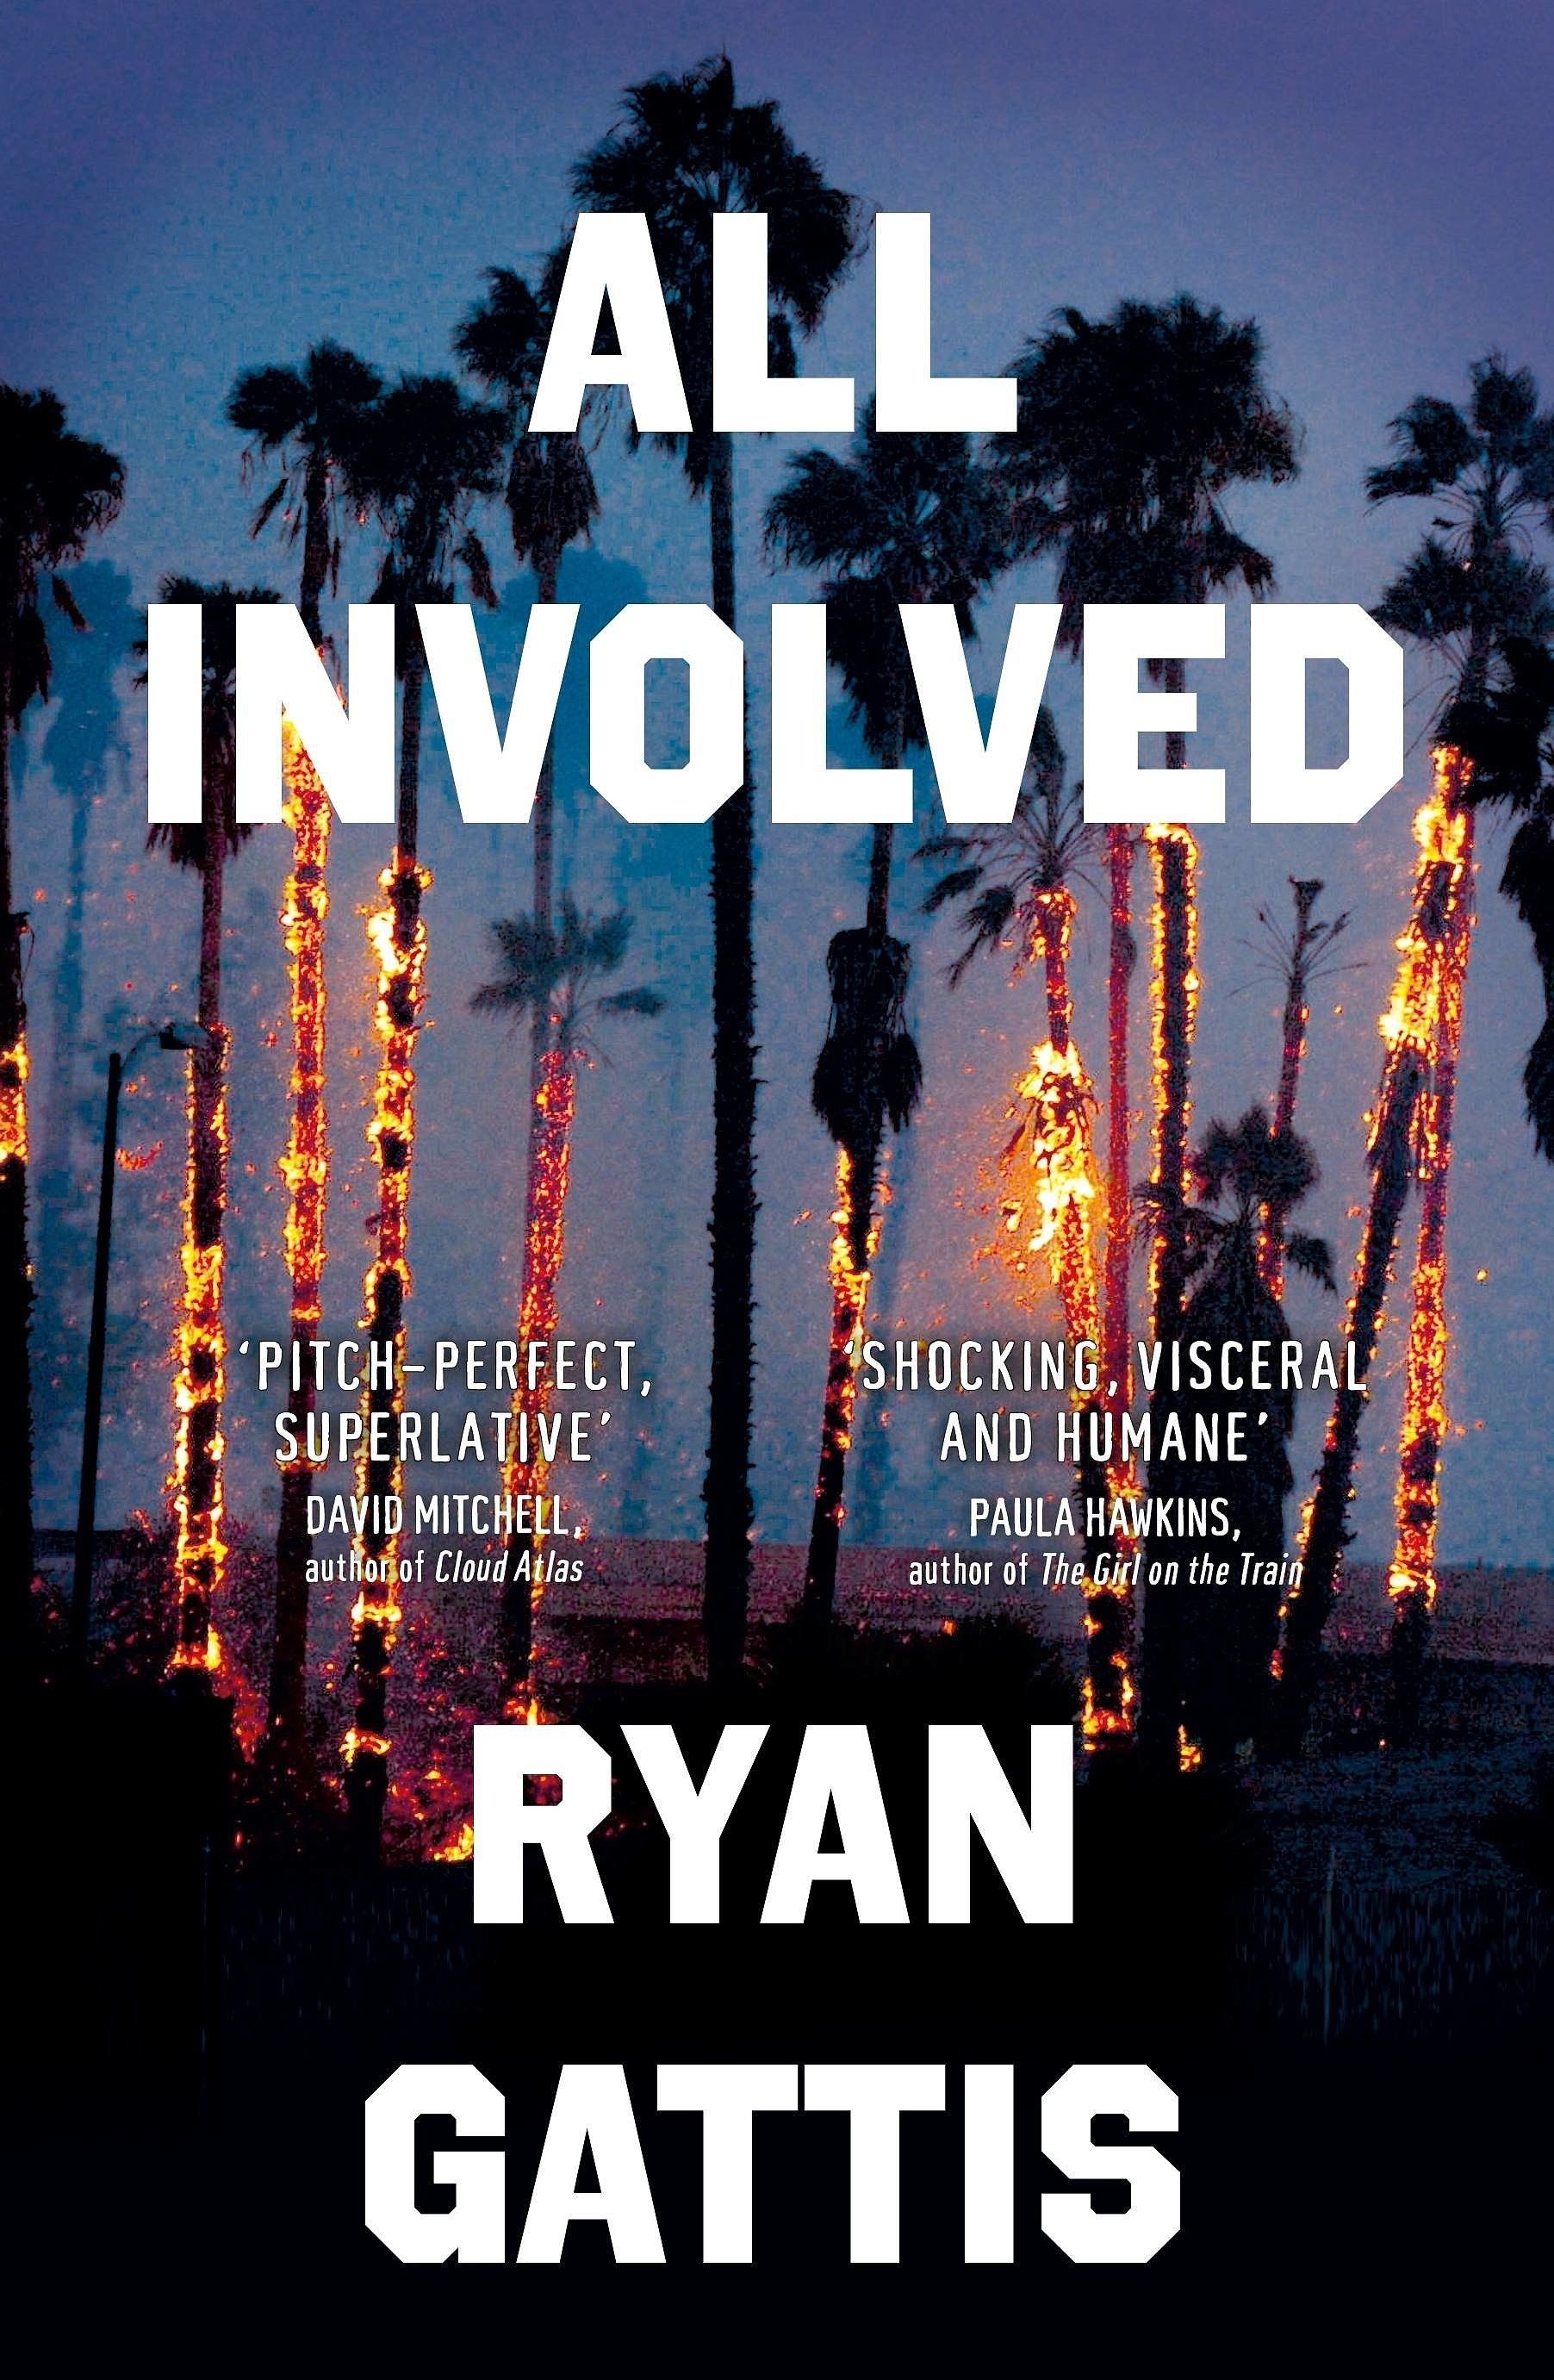 An Interview with Ryan Gattis, author of “All Involved”